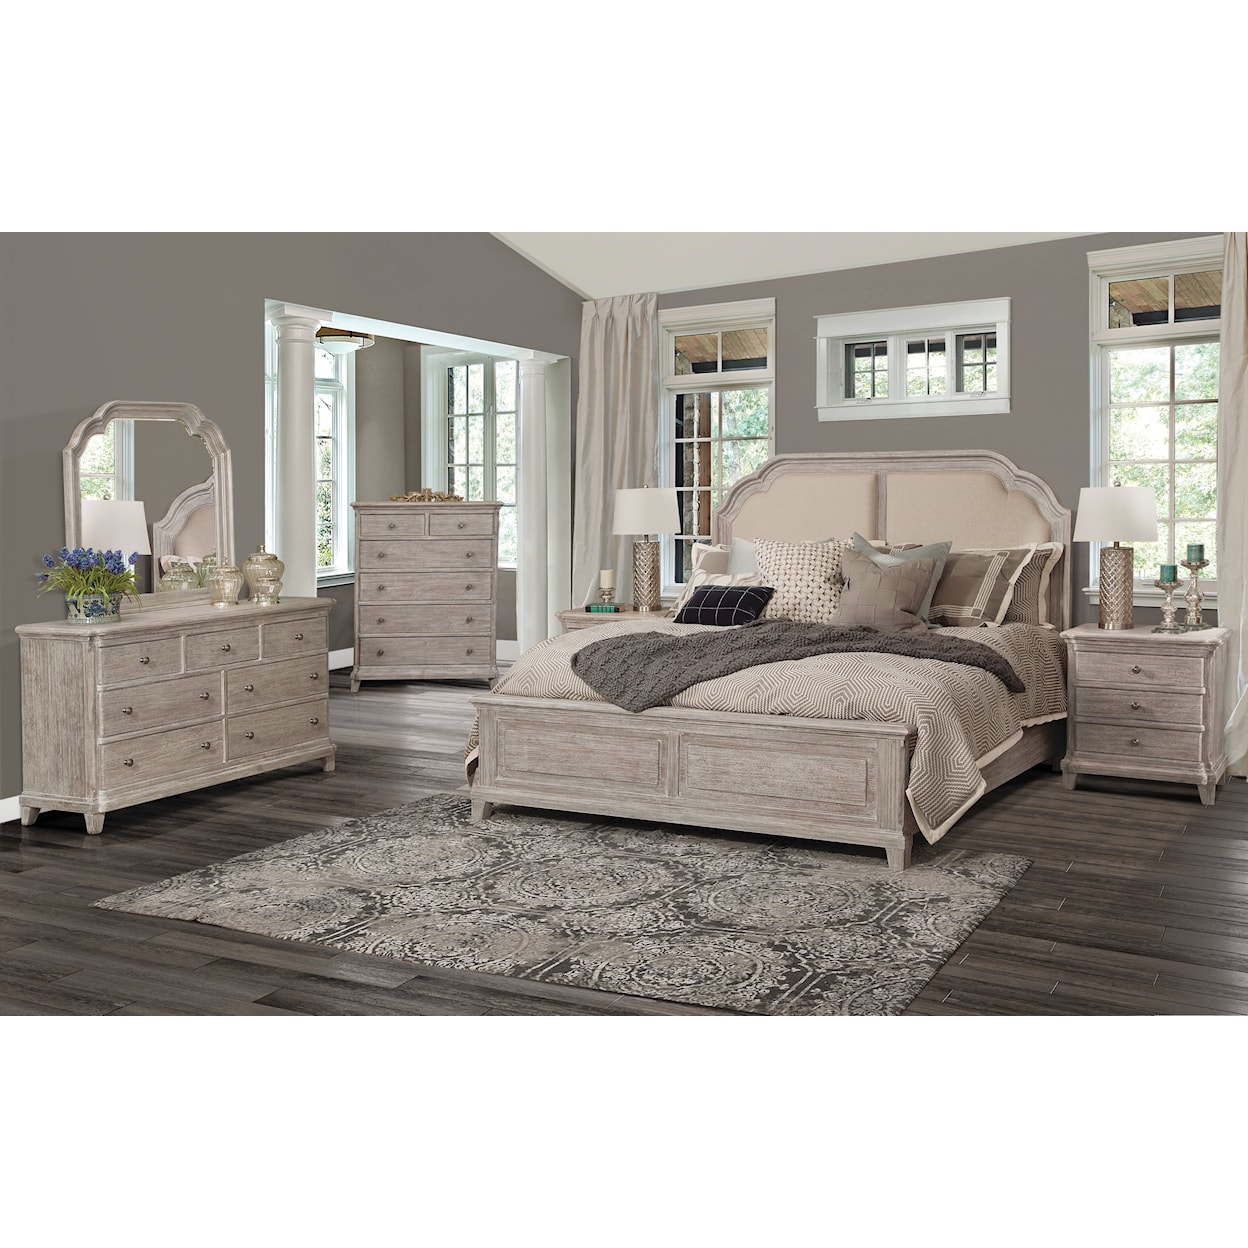 American Woodcrafters Painters Creek Upholstered King Bed